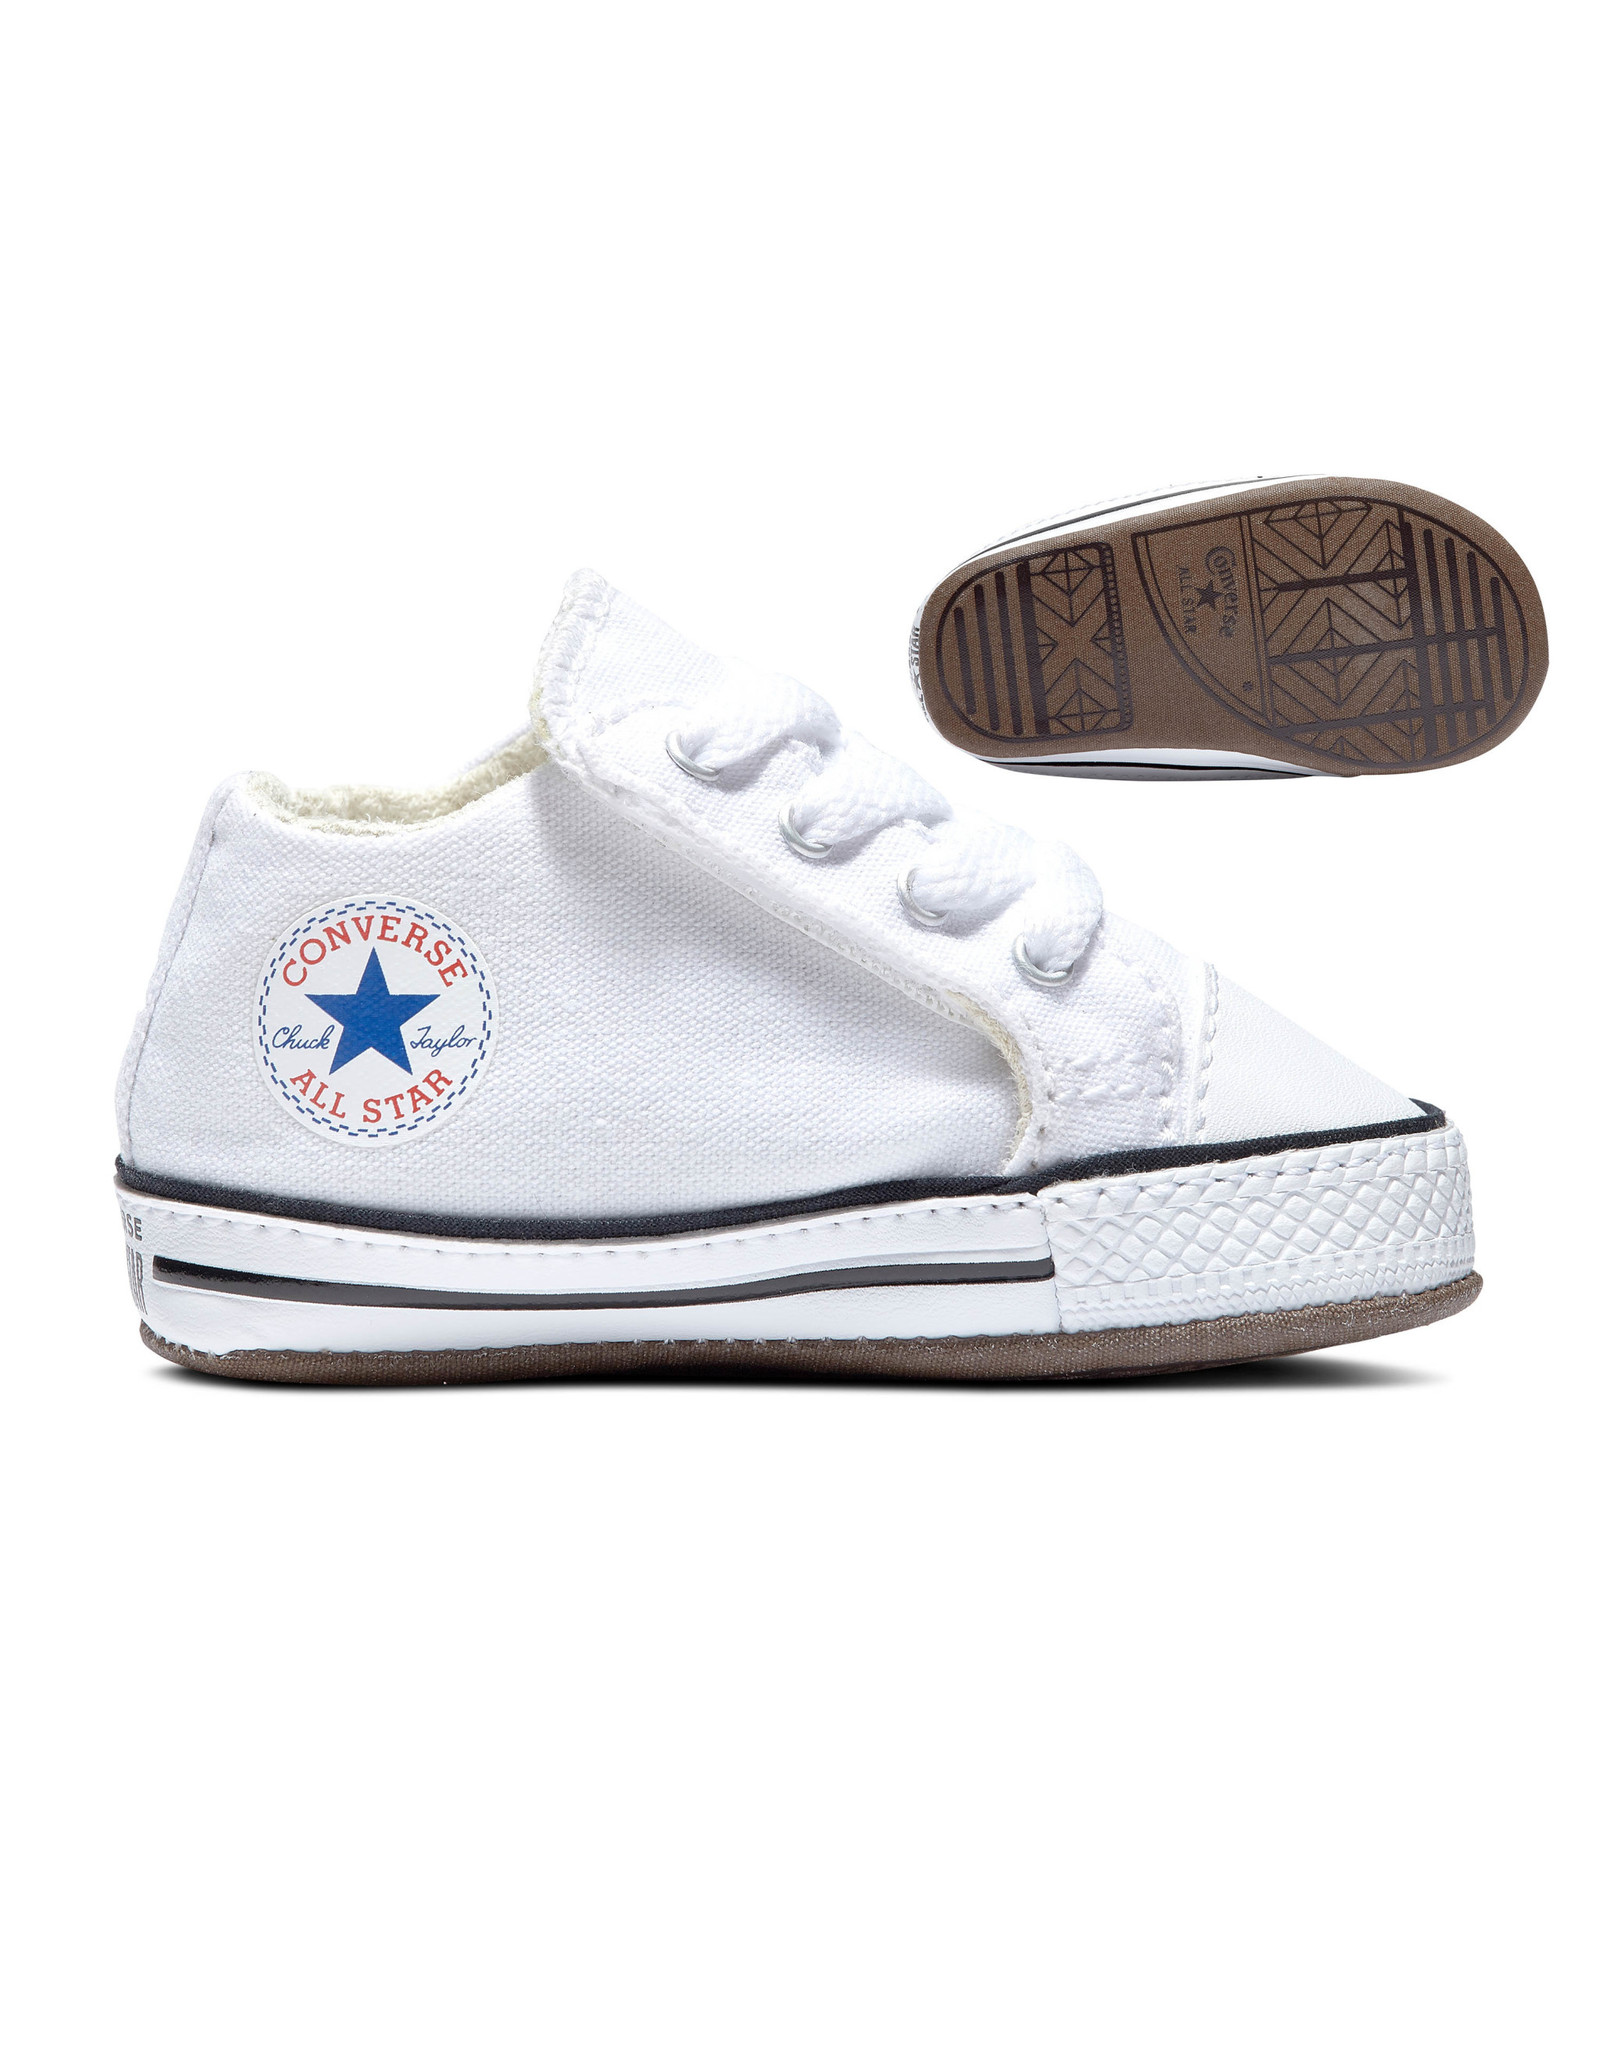 CHUCK TAYLOR ALL STAR CRIBSTER MID WHITE/ NATURAL IVORY C12WN-865157C